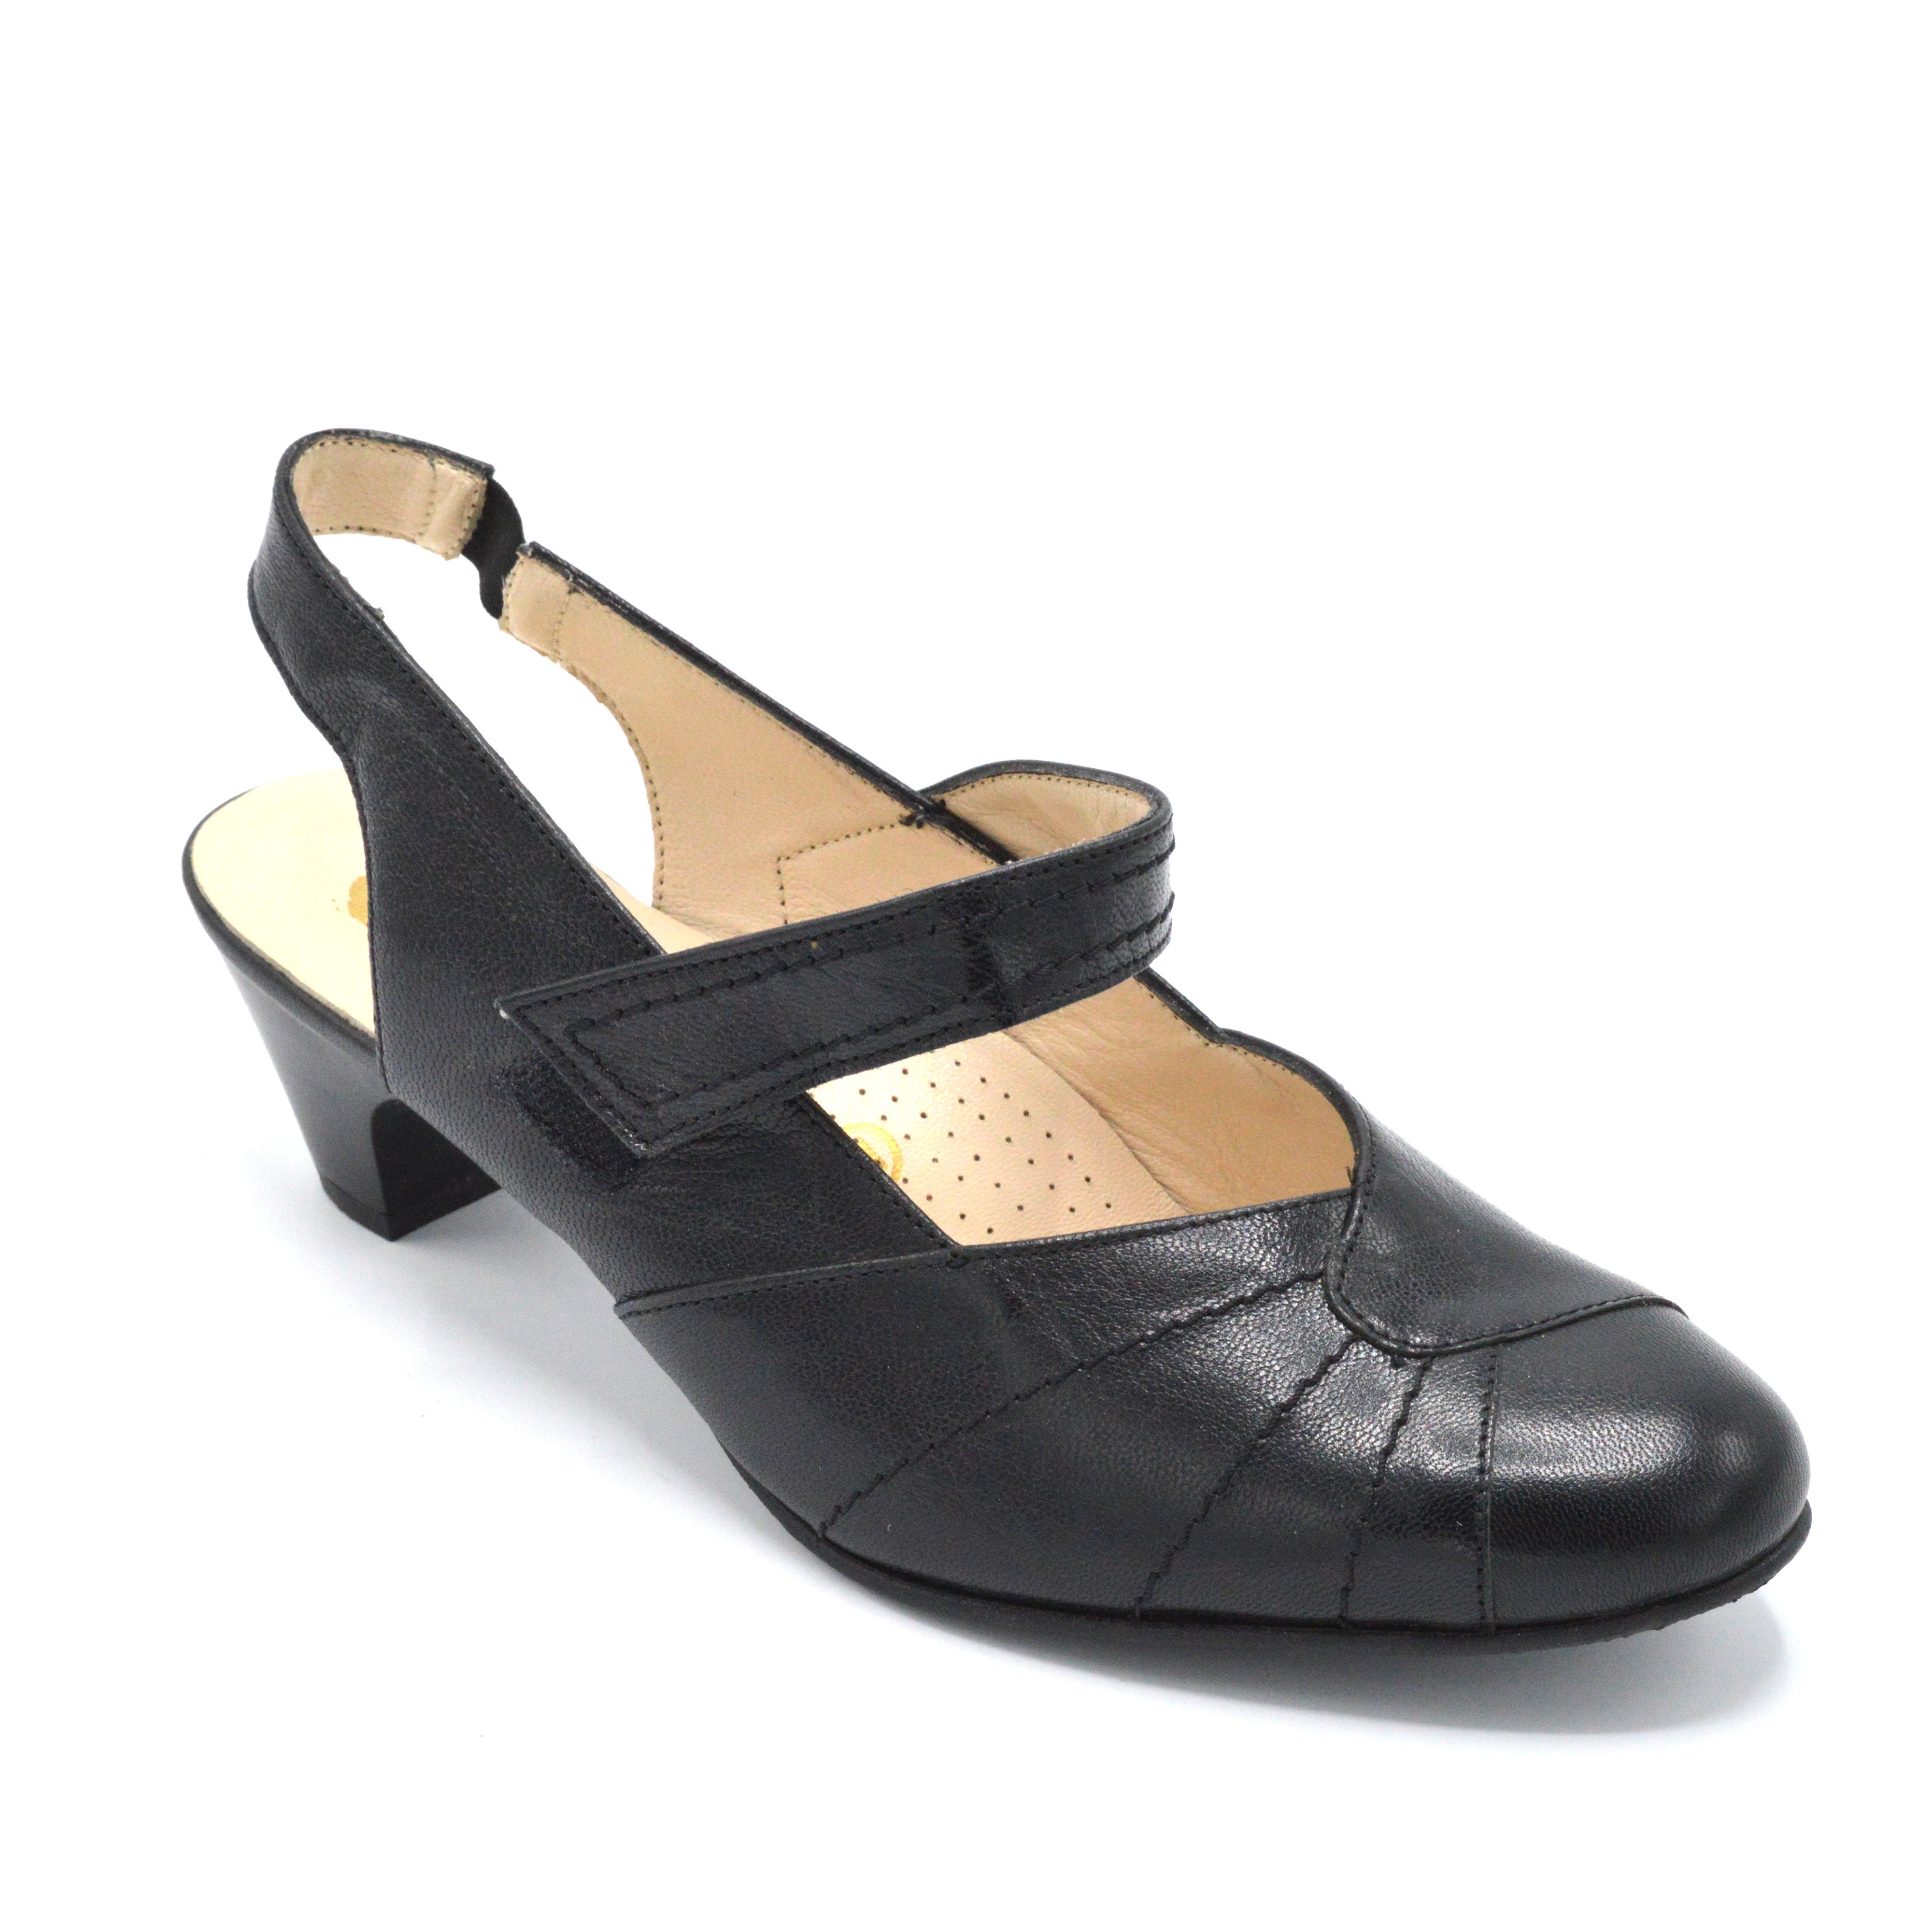 Fablo By Ombella - Ladies Wide Fit Dress Shoe - 2E Fitting - Black